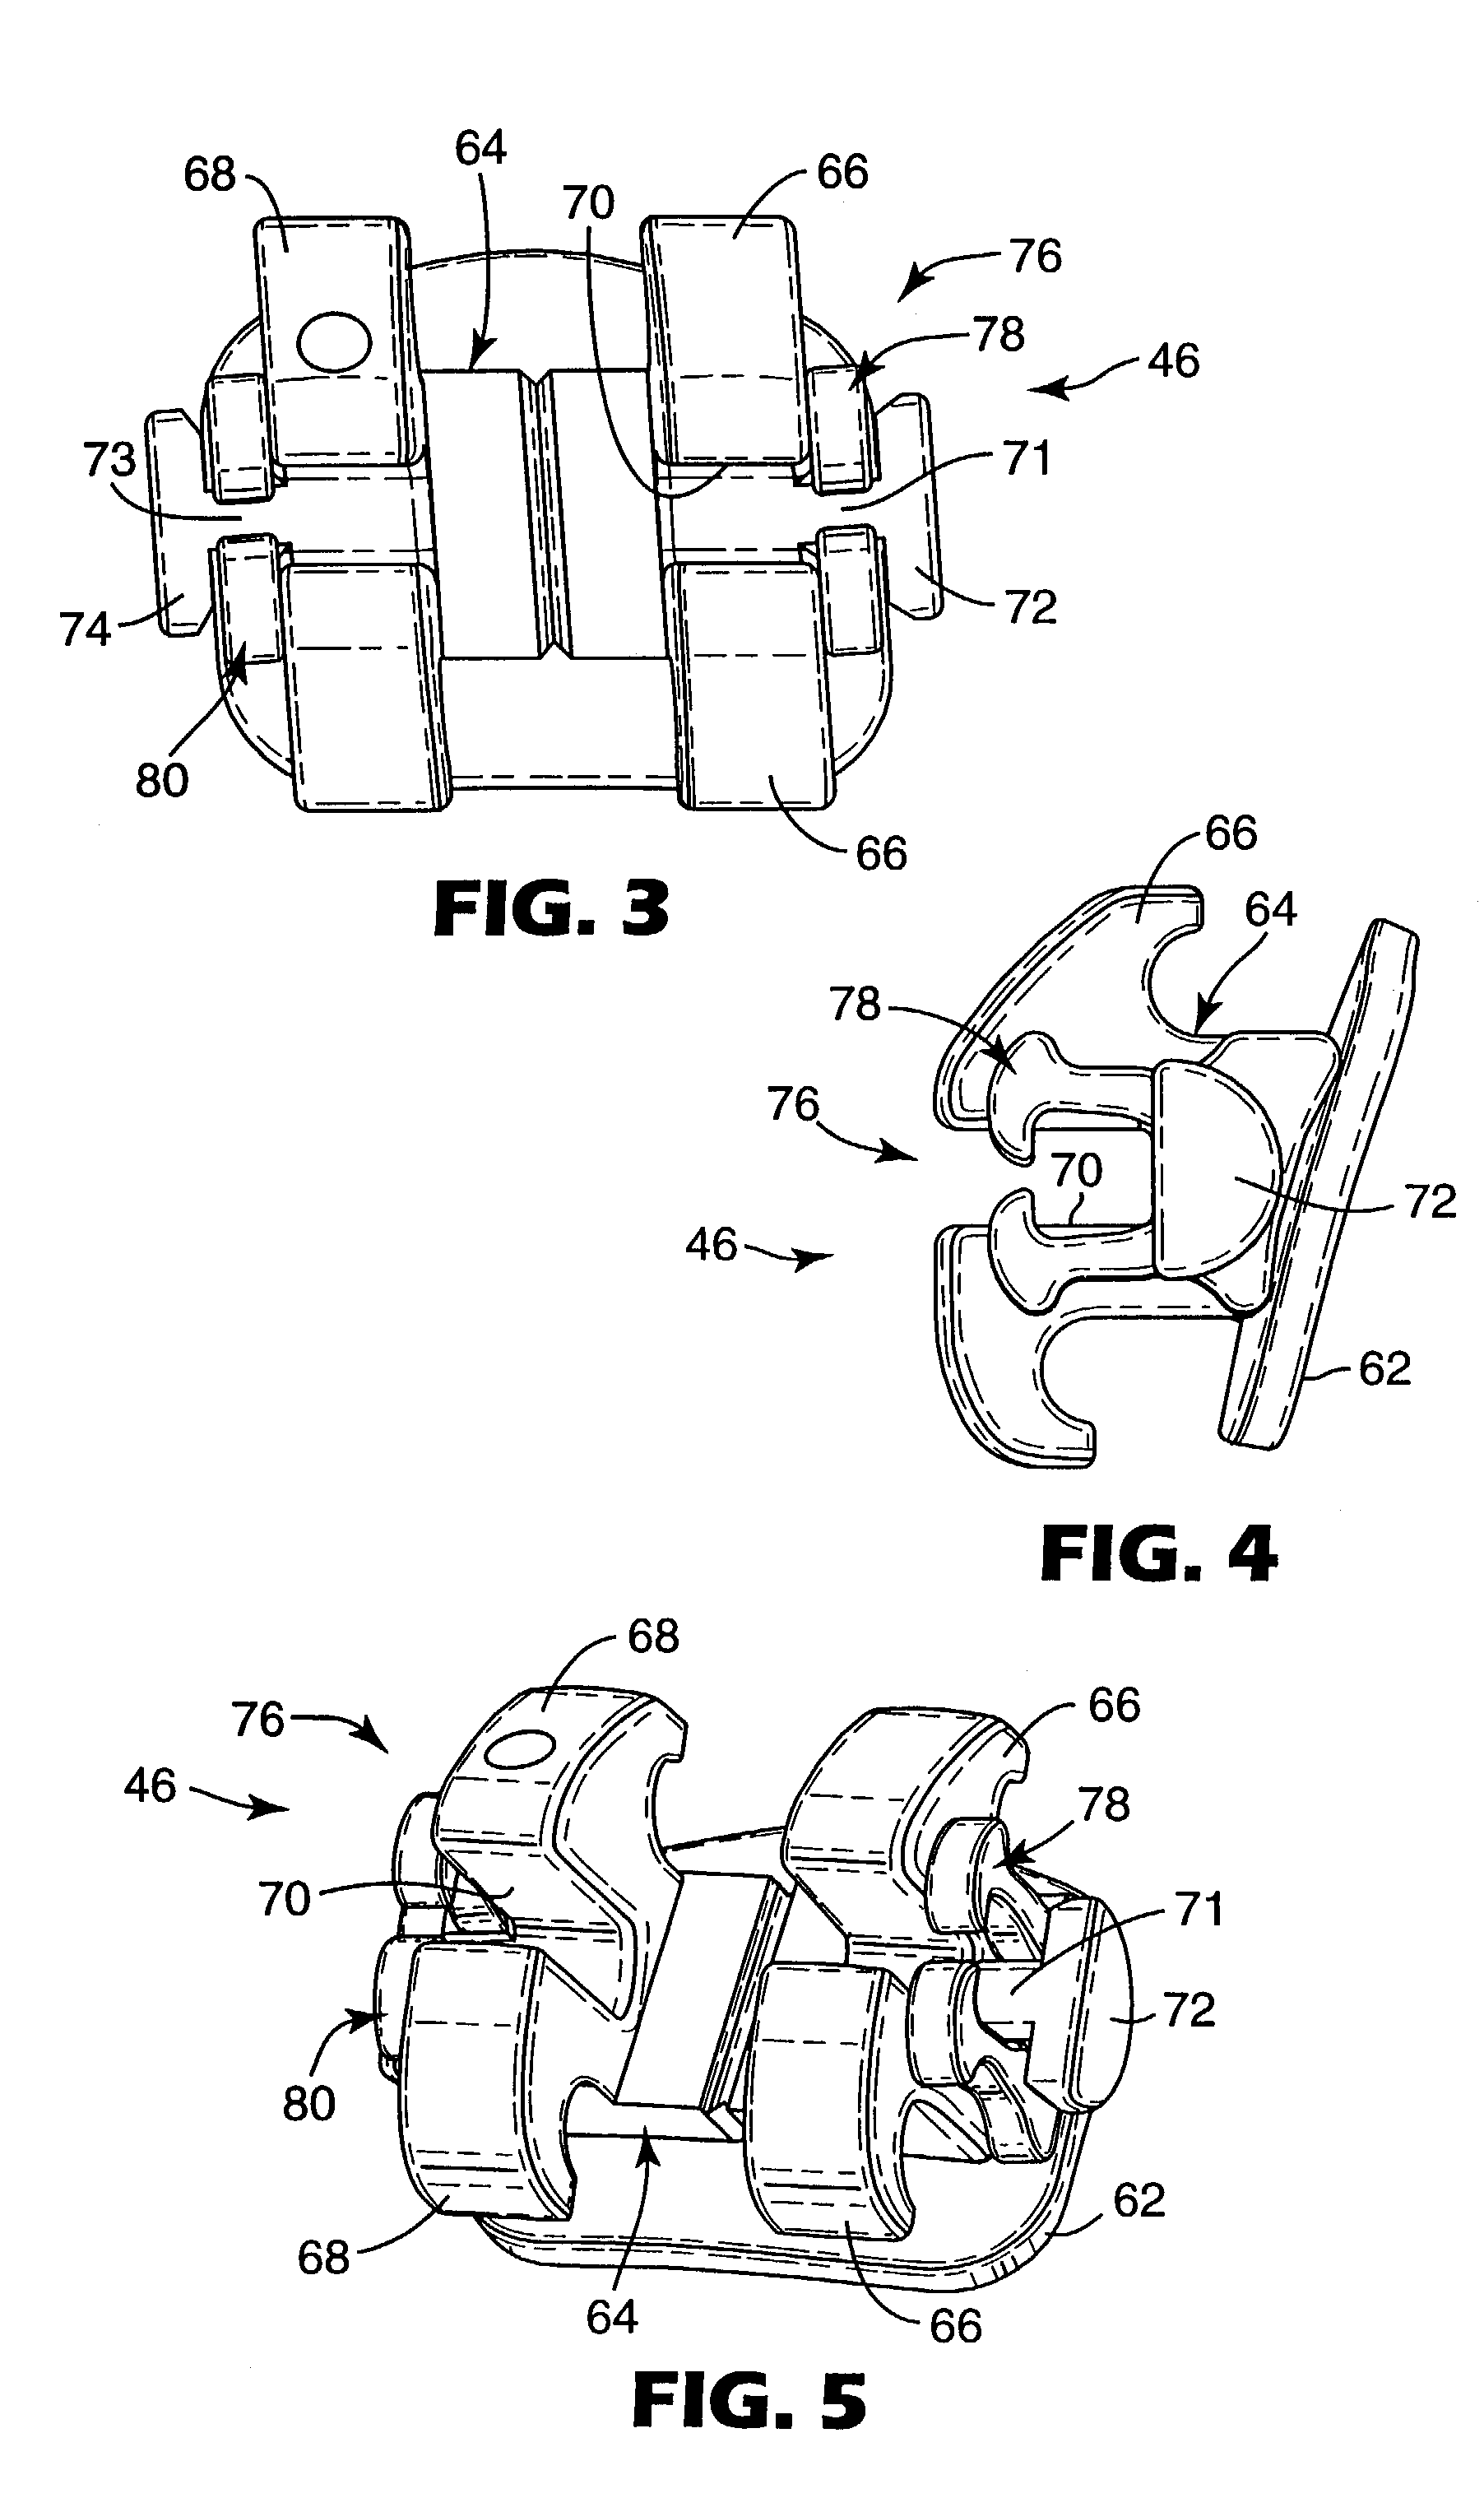 Orthodontic brace with self-releasing appliances